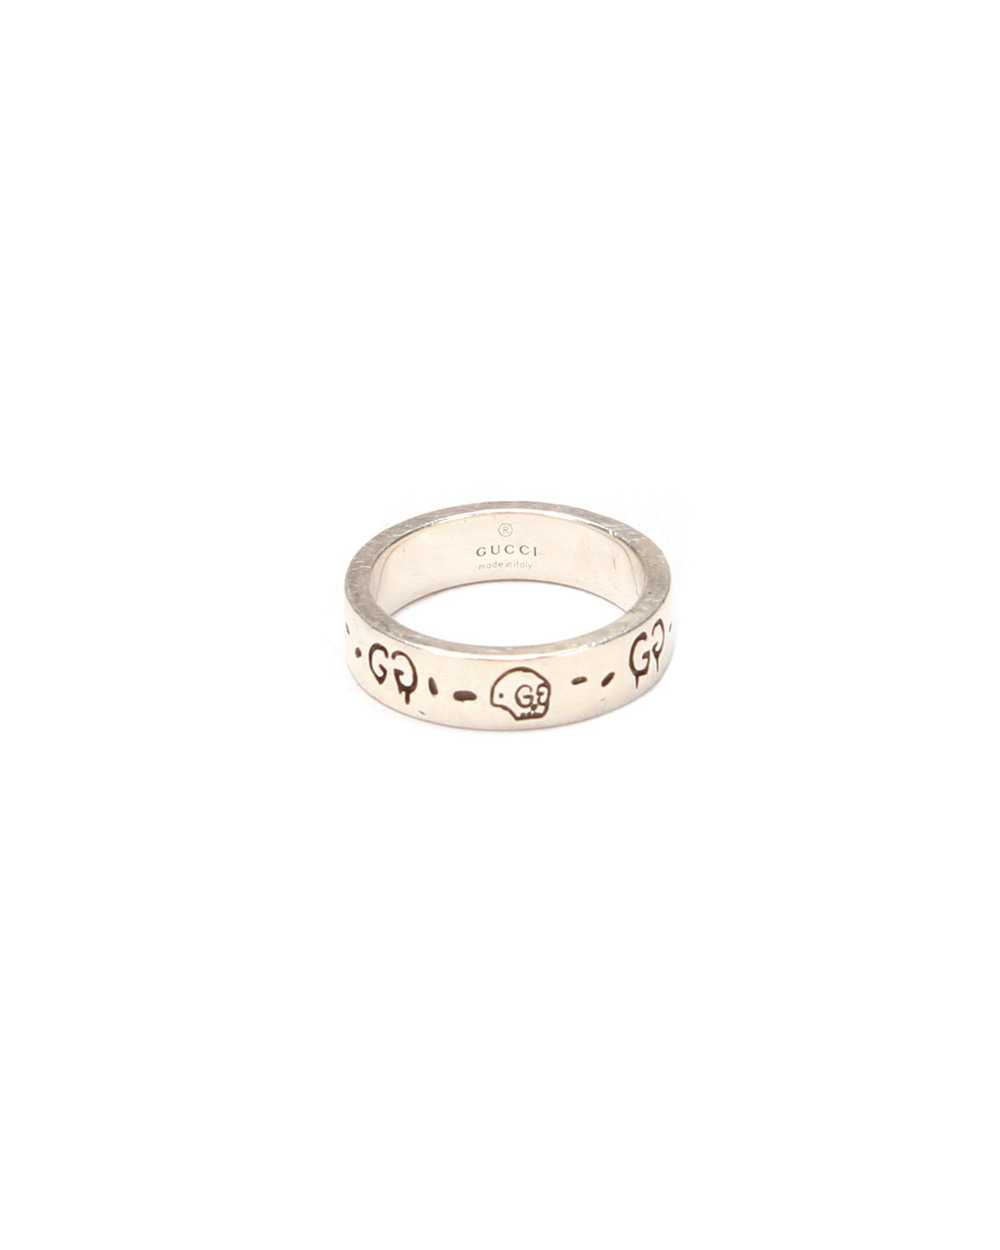 GUCCI Women's Silver Ghost Icon Ring in Silver - image 1